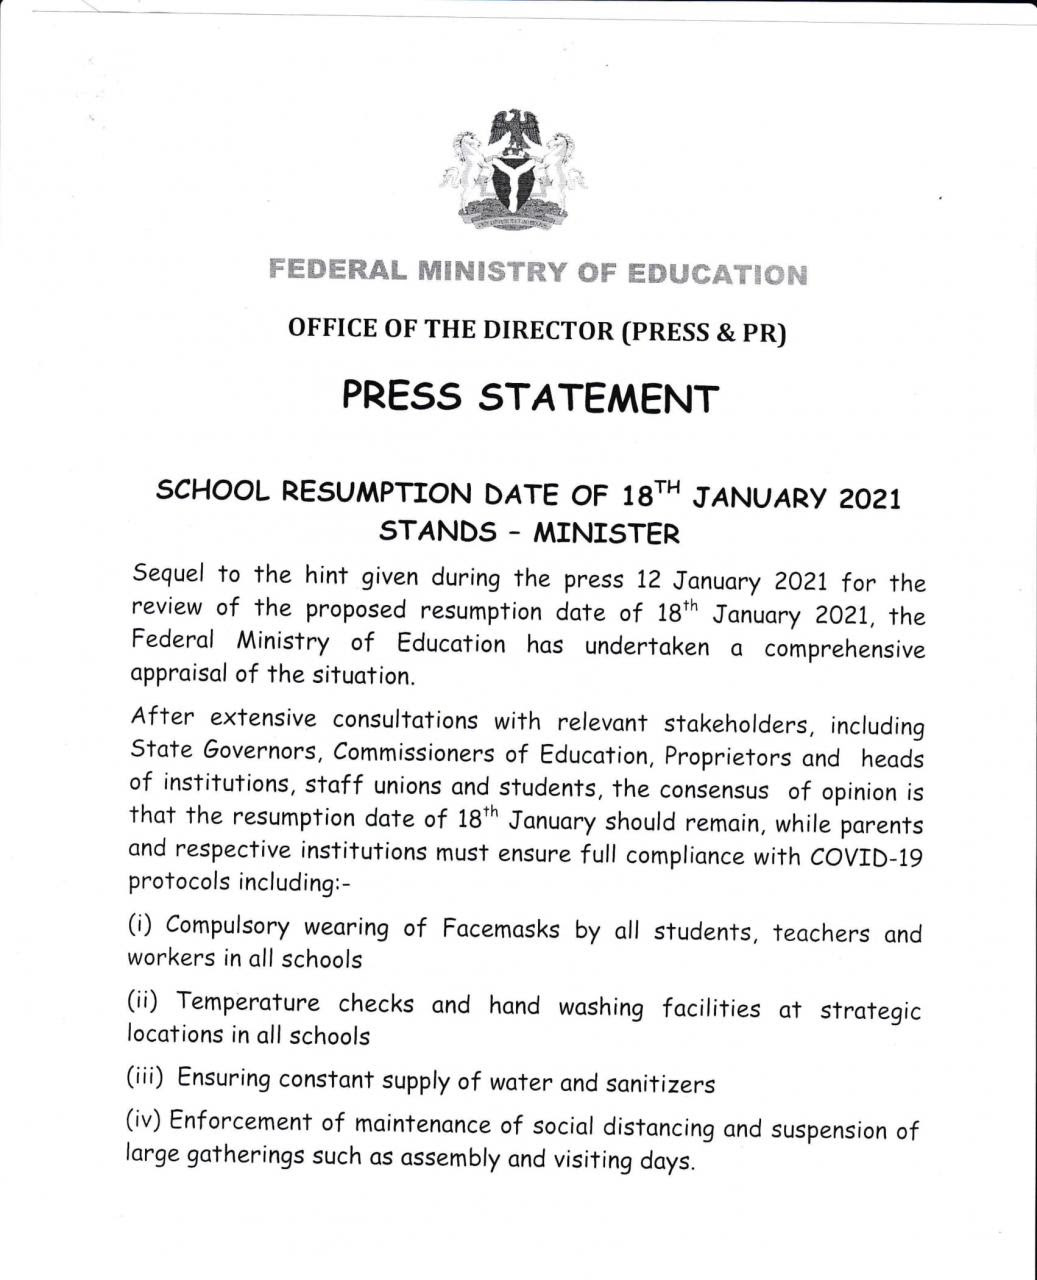 January 18 resumption date for schools stands- FG